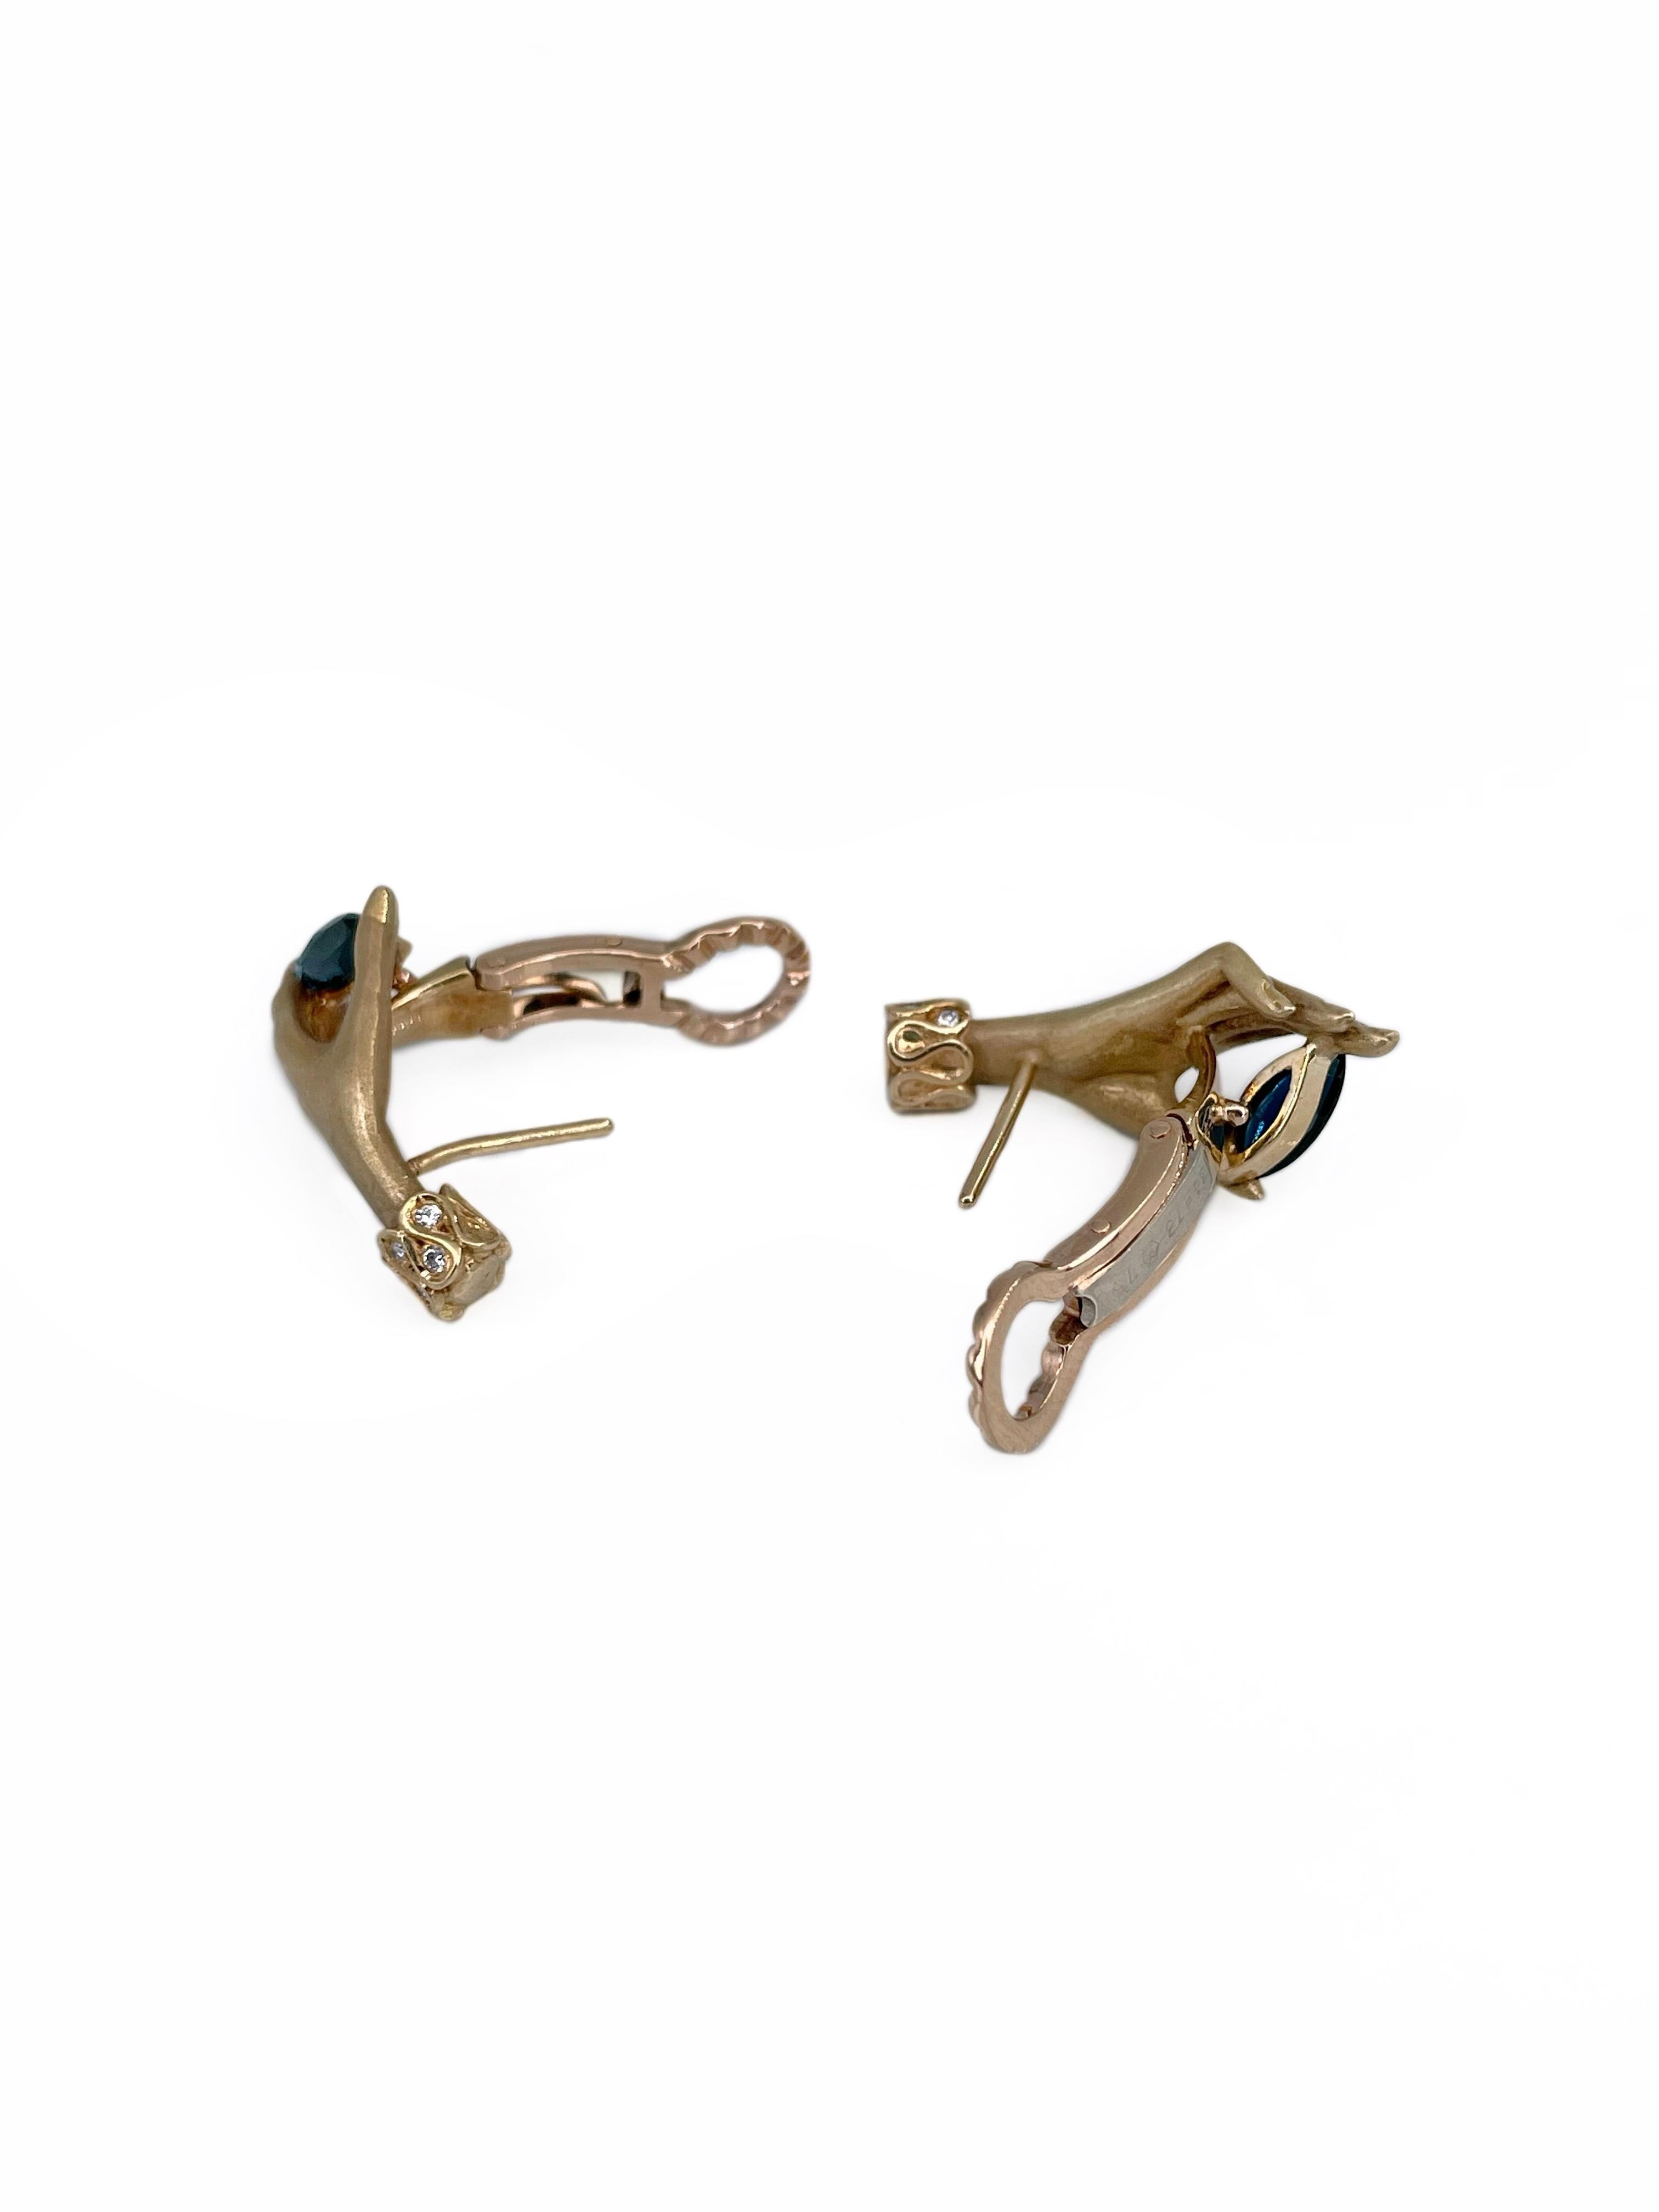 Mixed Cut Carrera Y Carrera 18 Karat Gold Hand Holding Sapphire French Back Earrings For Sale